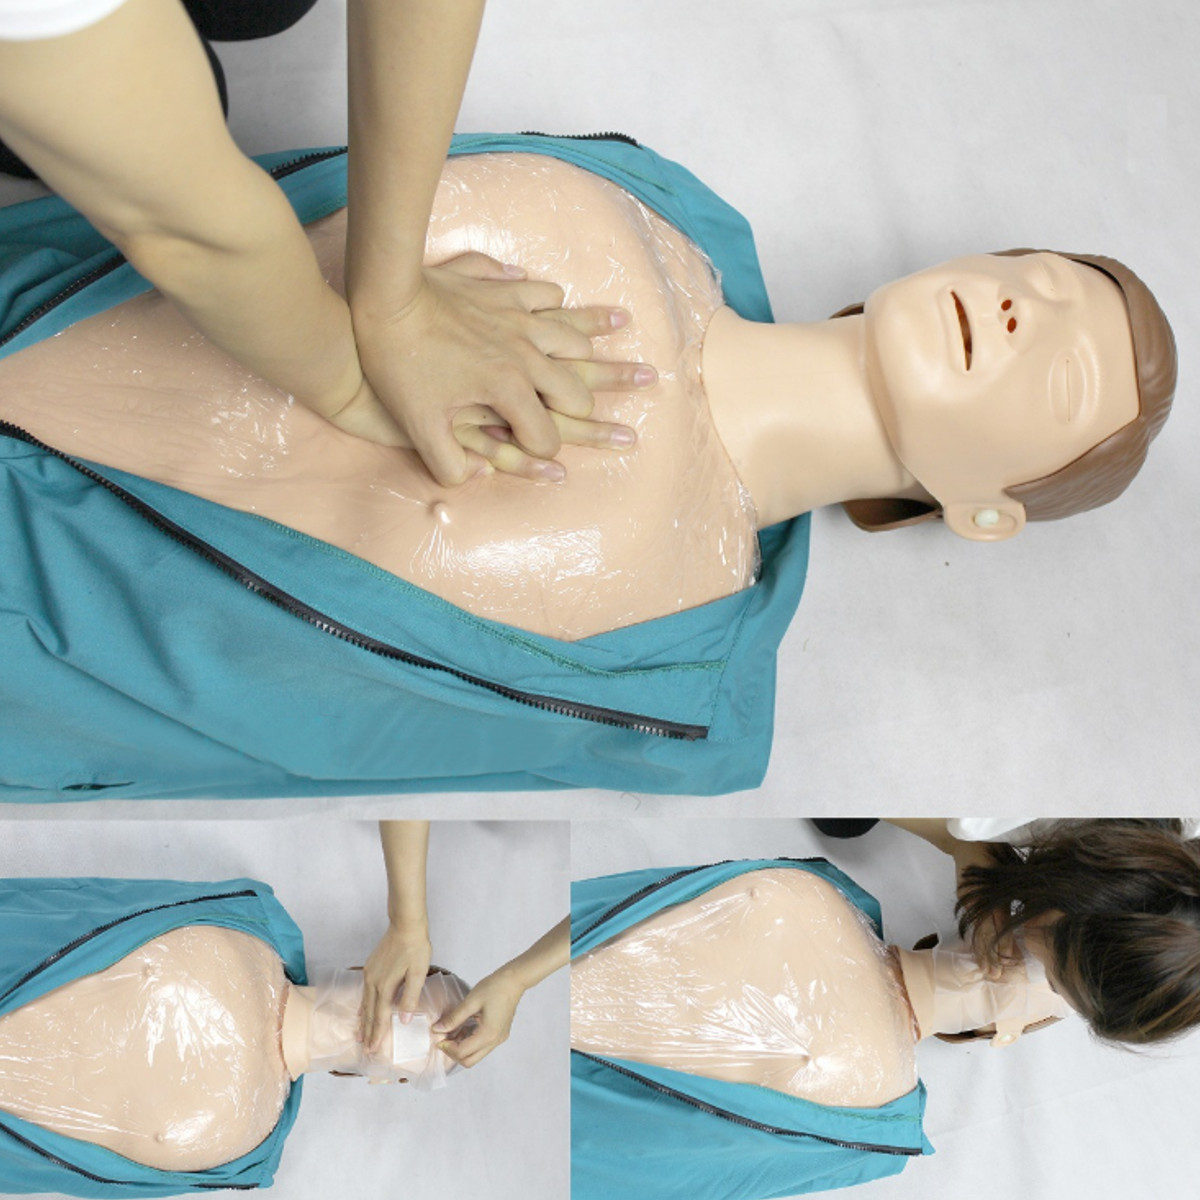 CPR-Adult-Manikin-AED-First-Aid-Training-Dummy-Training-Medical-Model-Respiration-Human-1545480-4